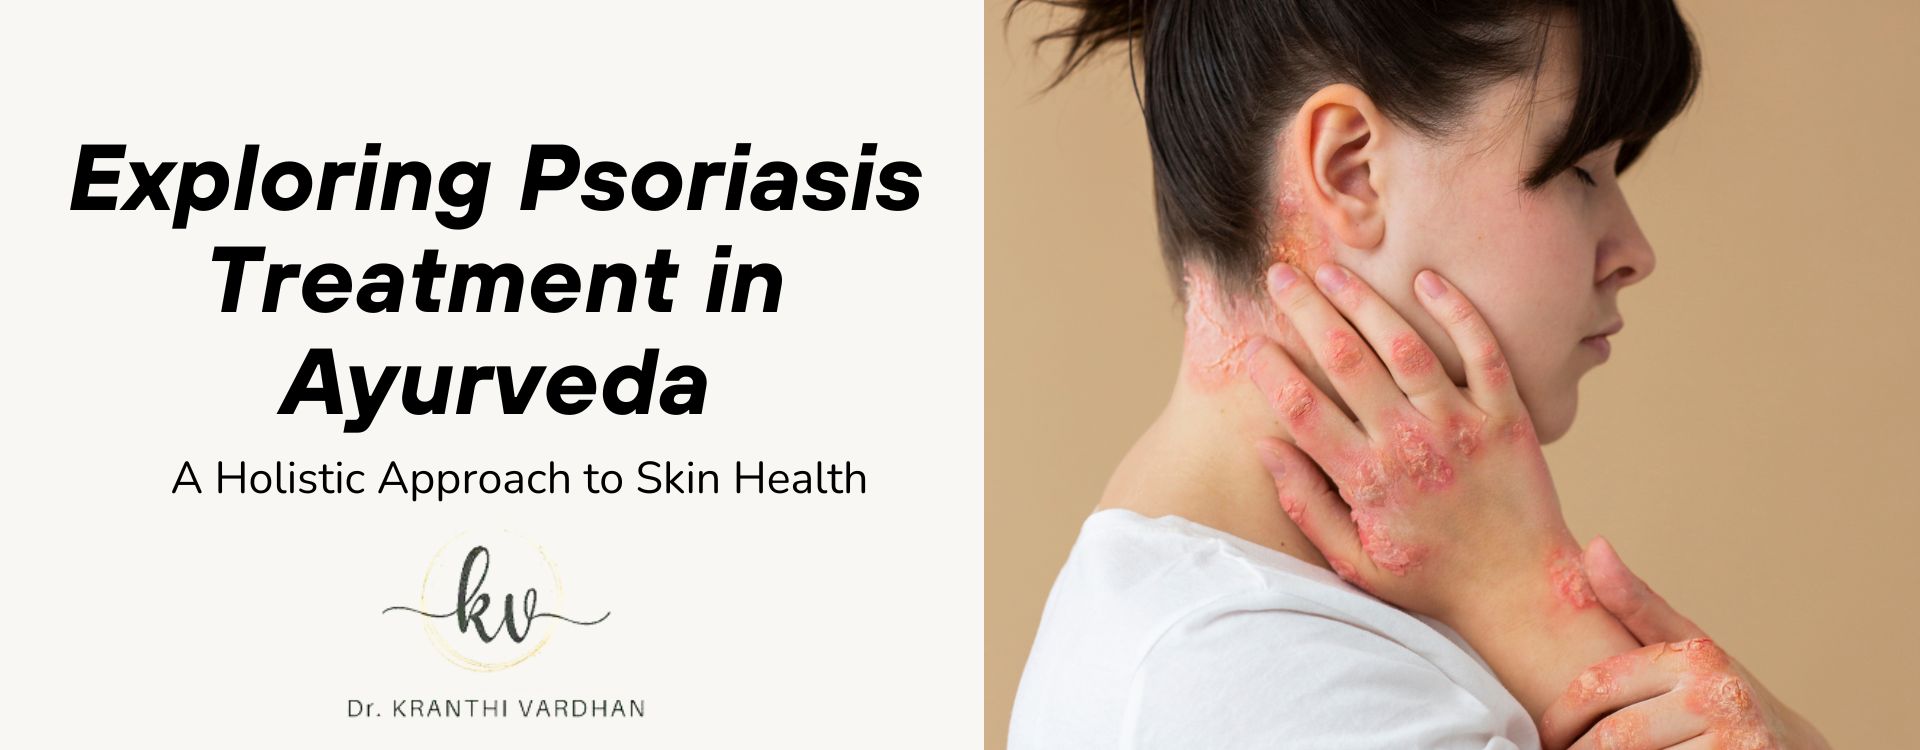 Exploring Psoriasis Treatment in Ayurveda: A Holistic Approach to Skin Health